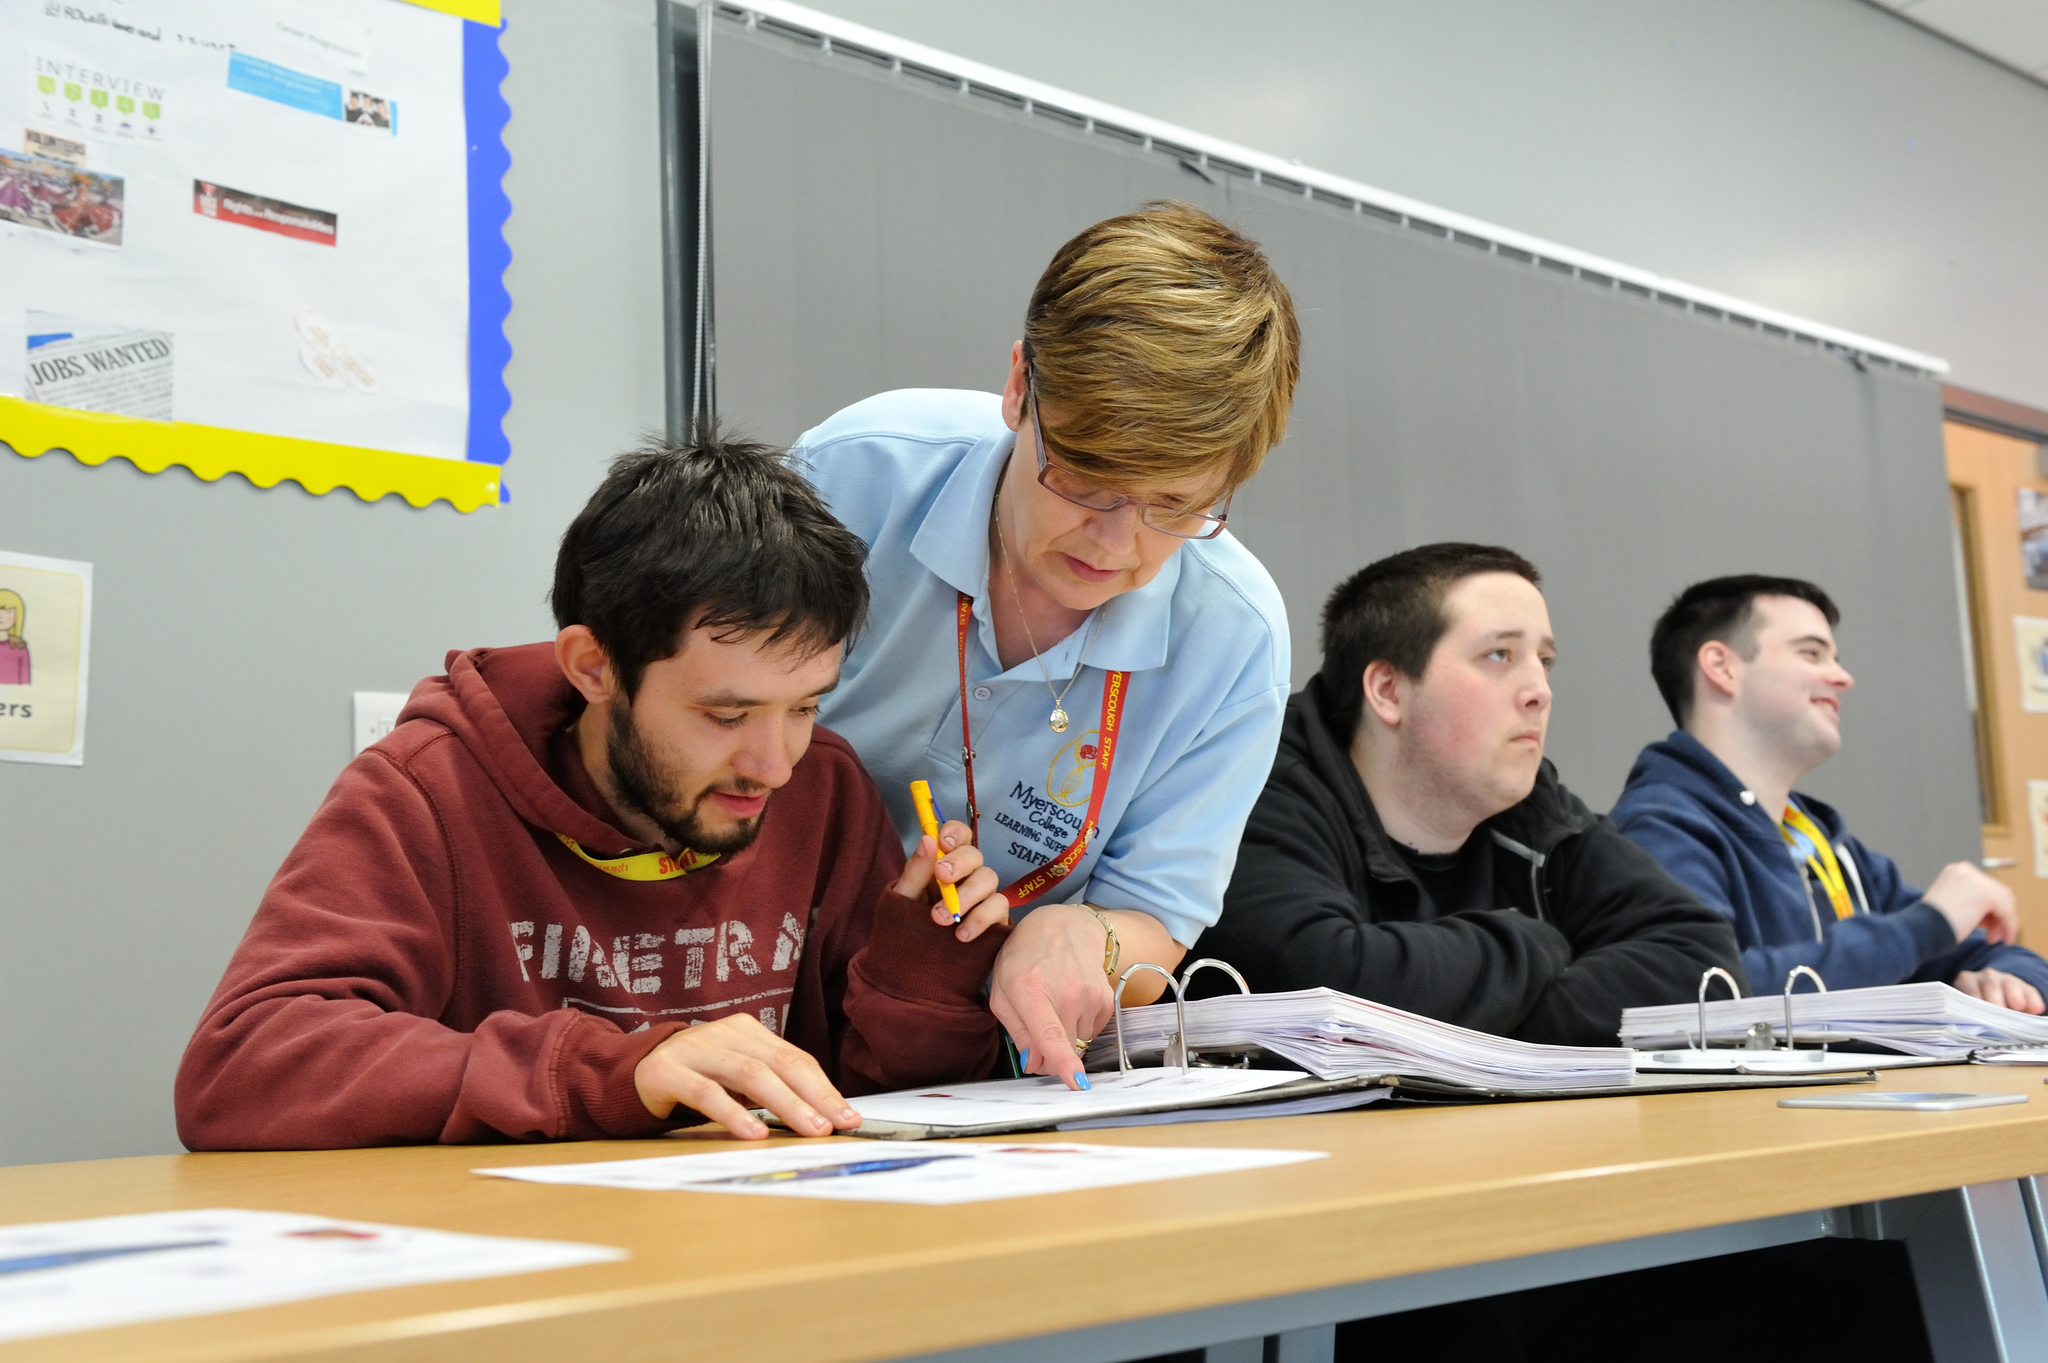 An Myerscough College learning support advisor offering one-to-one support to a student